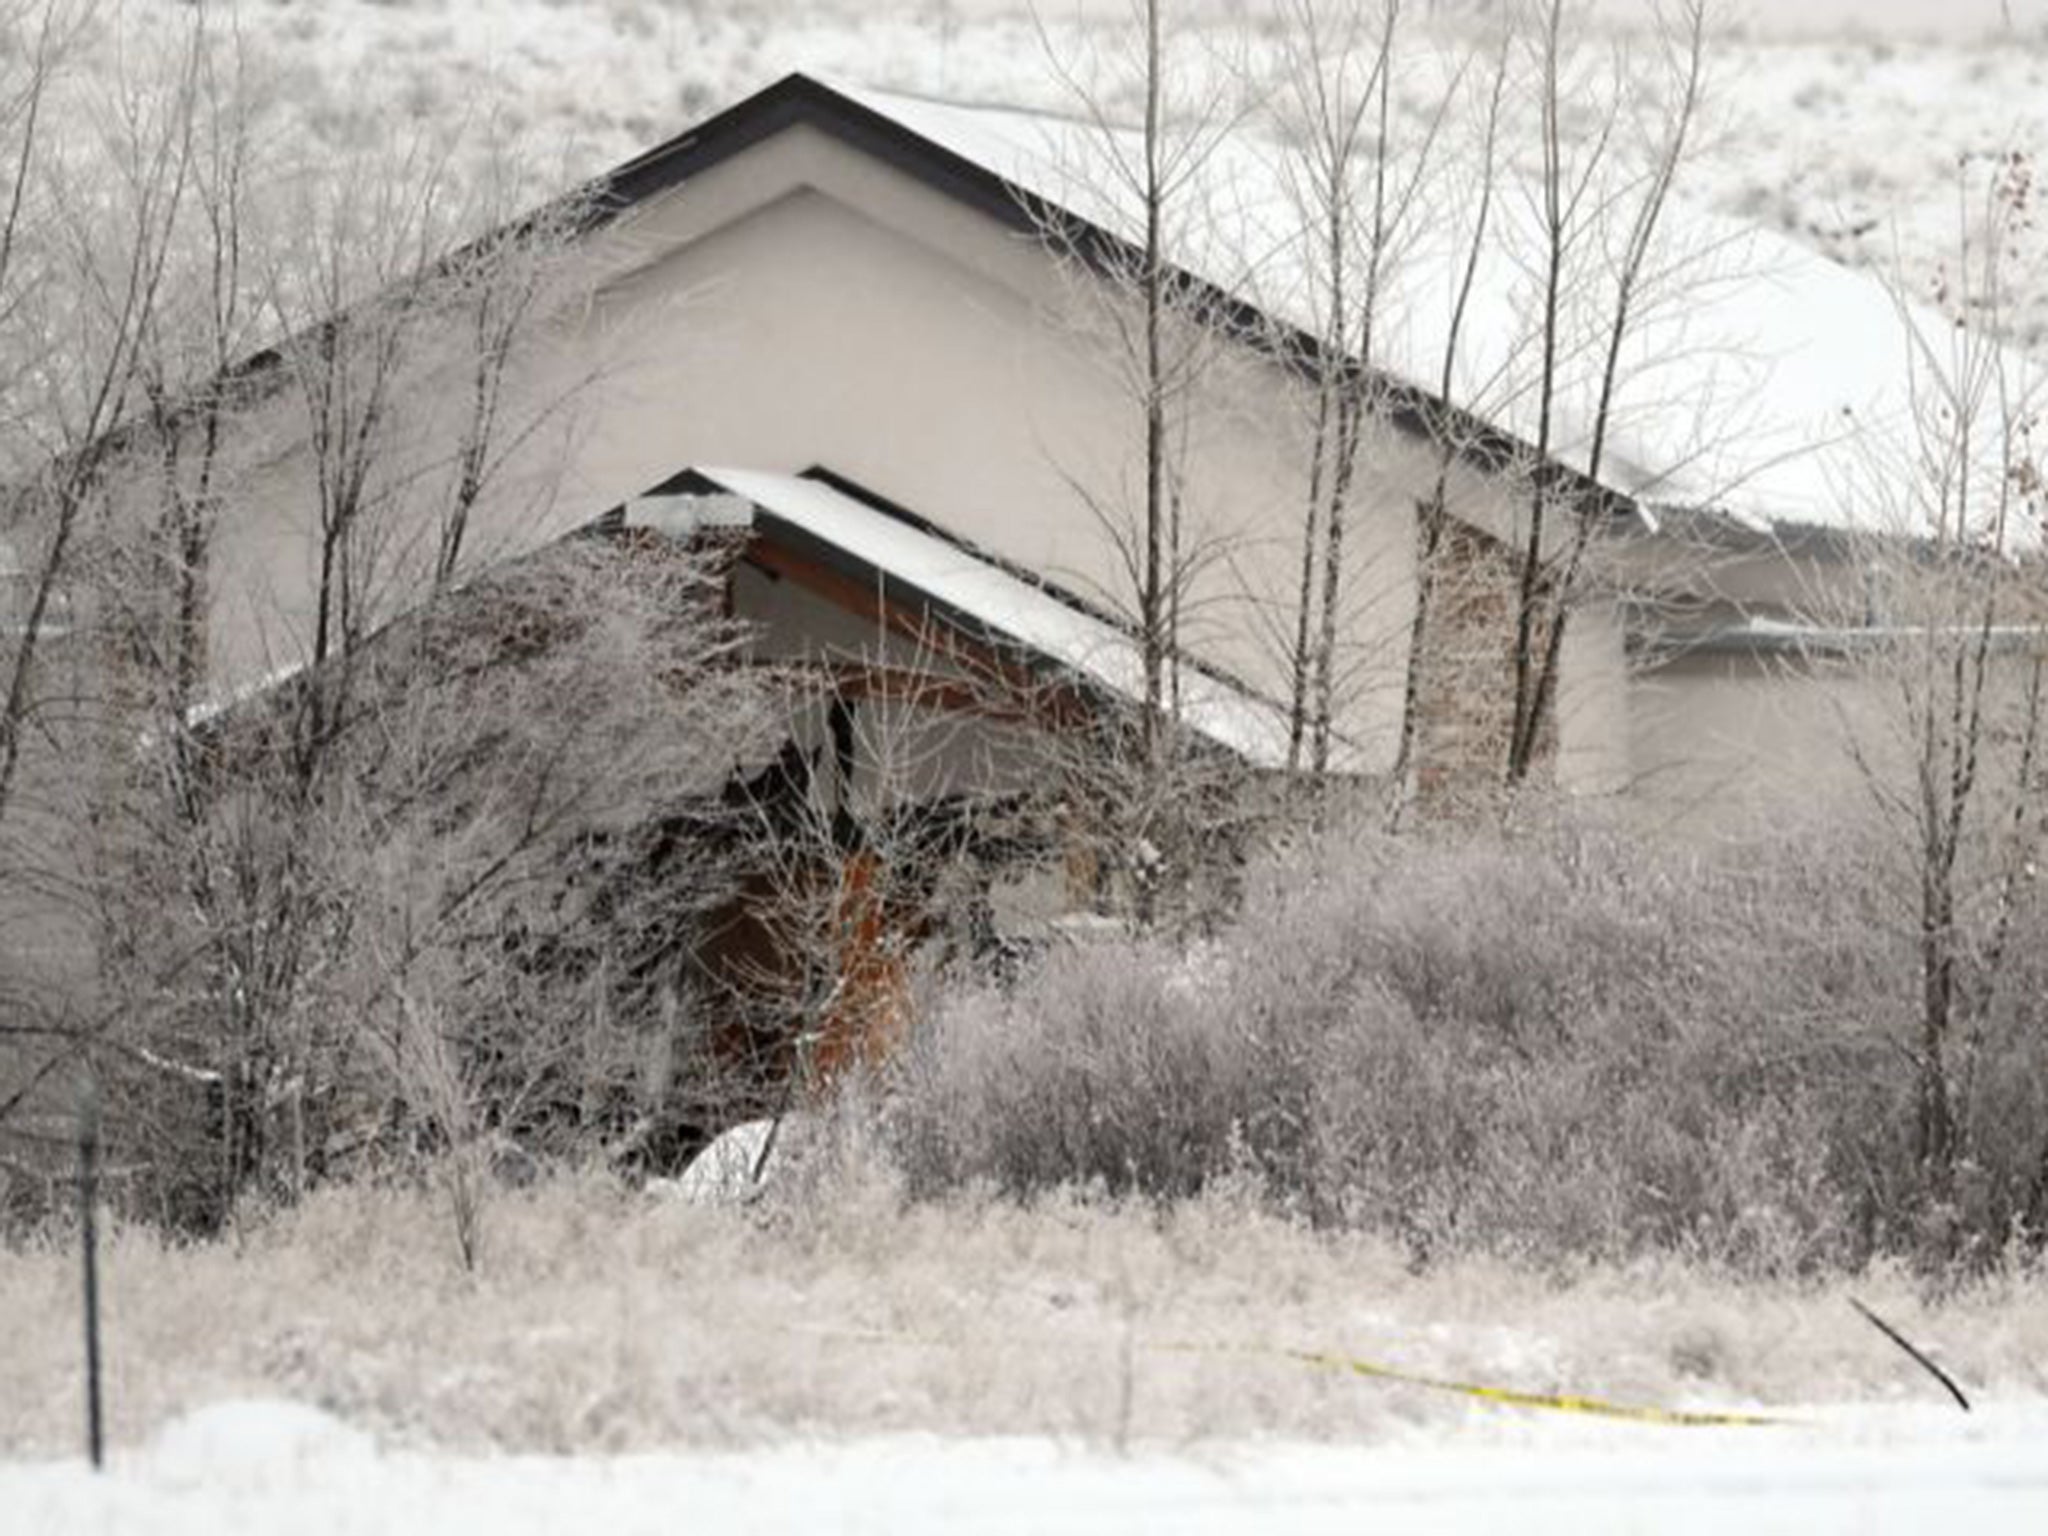 The Planned Parenthood clinic in Colorado Springs where the attack was carried out